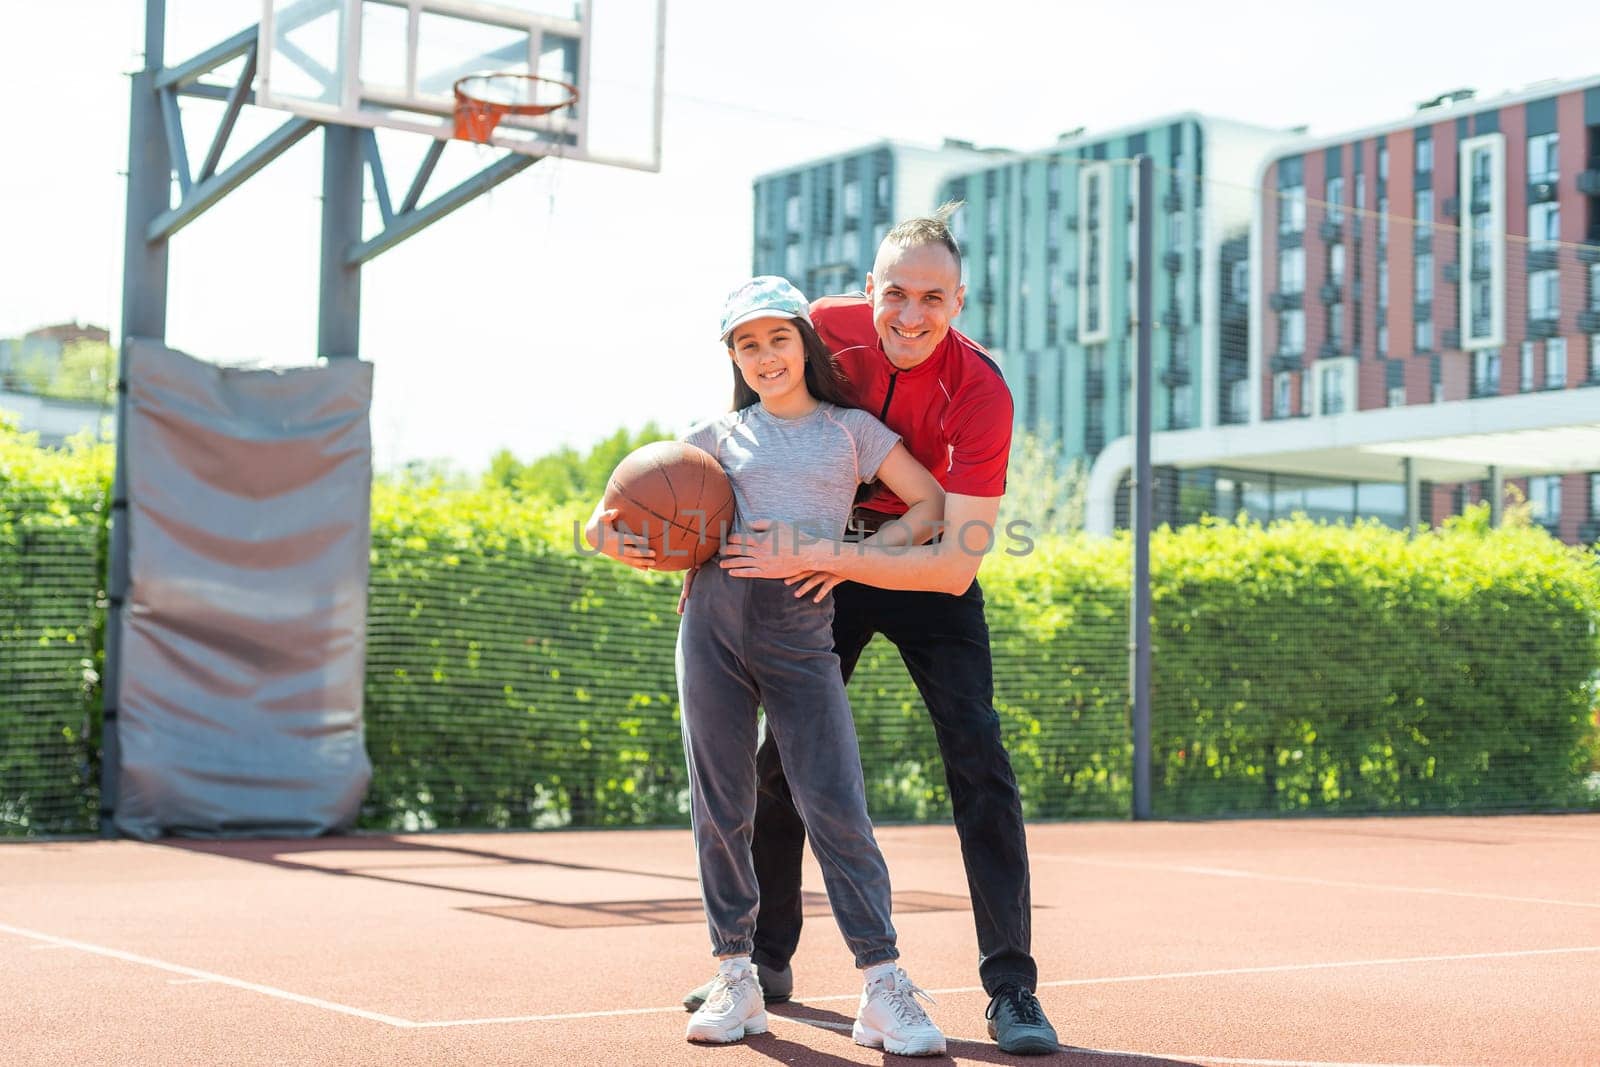 father and daughter playing basketball together on playground.